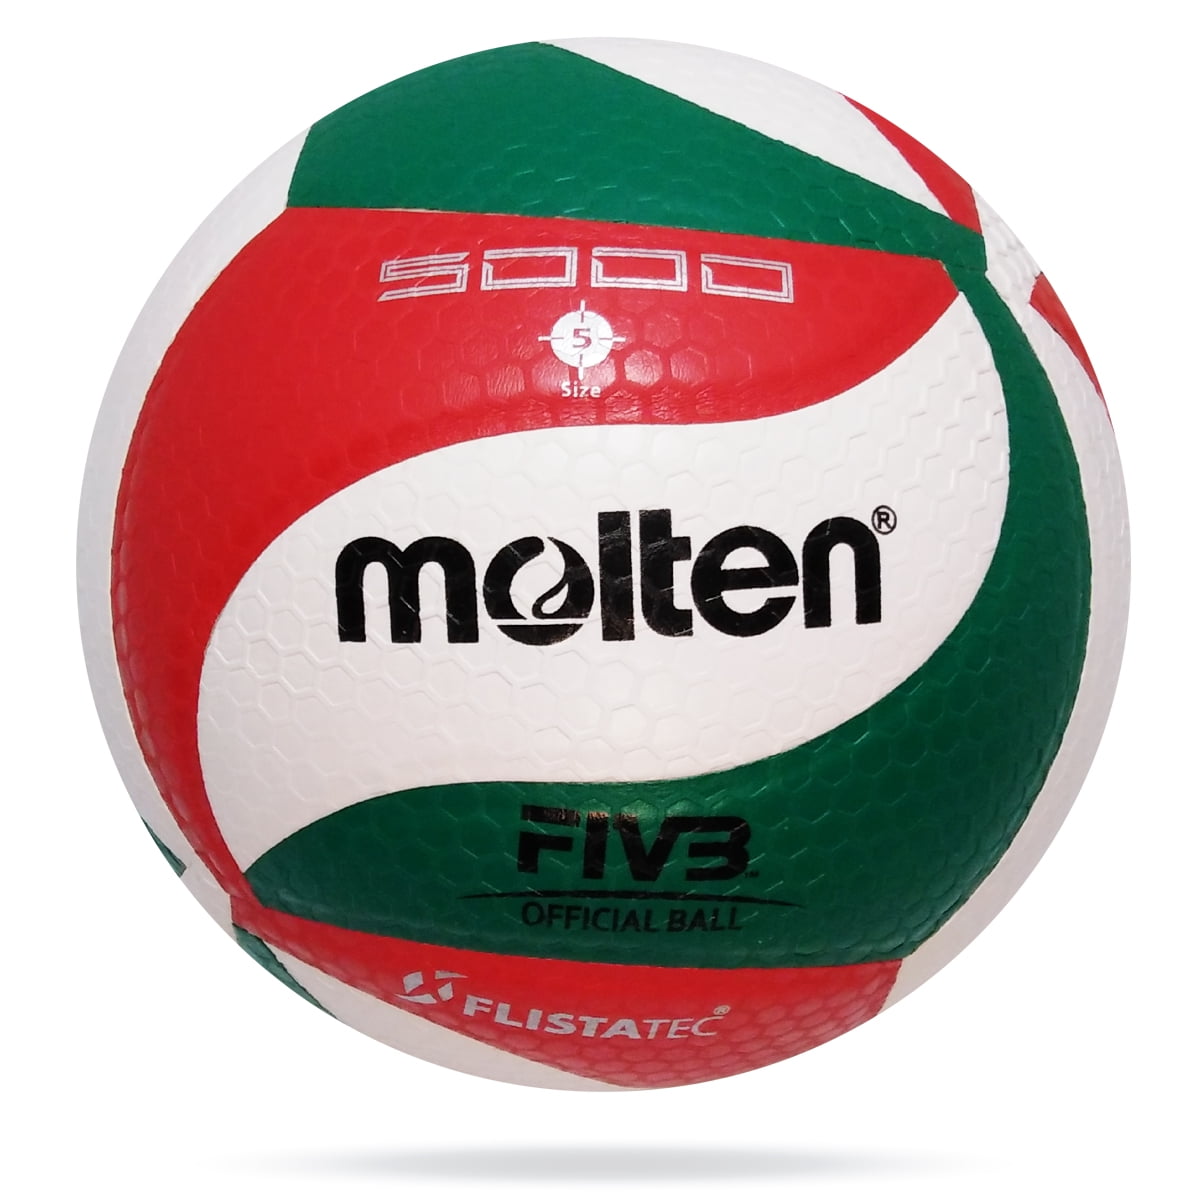 Molten PU Leather Volleyball Size5 Official v5m5000 Soft IndoorOutdoor Game Ball 